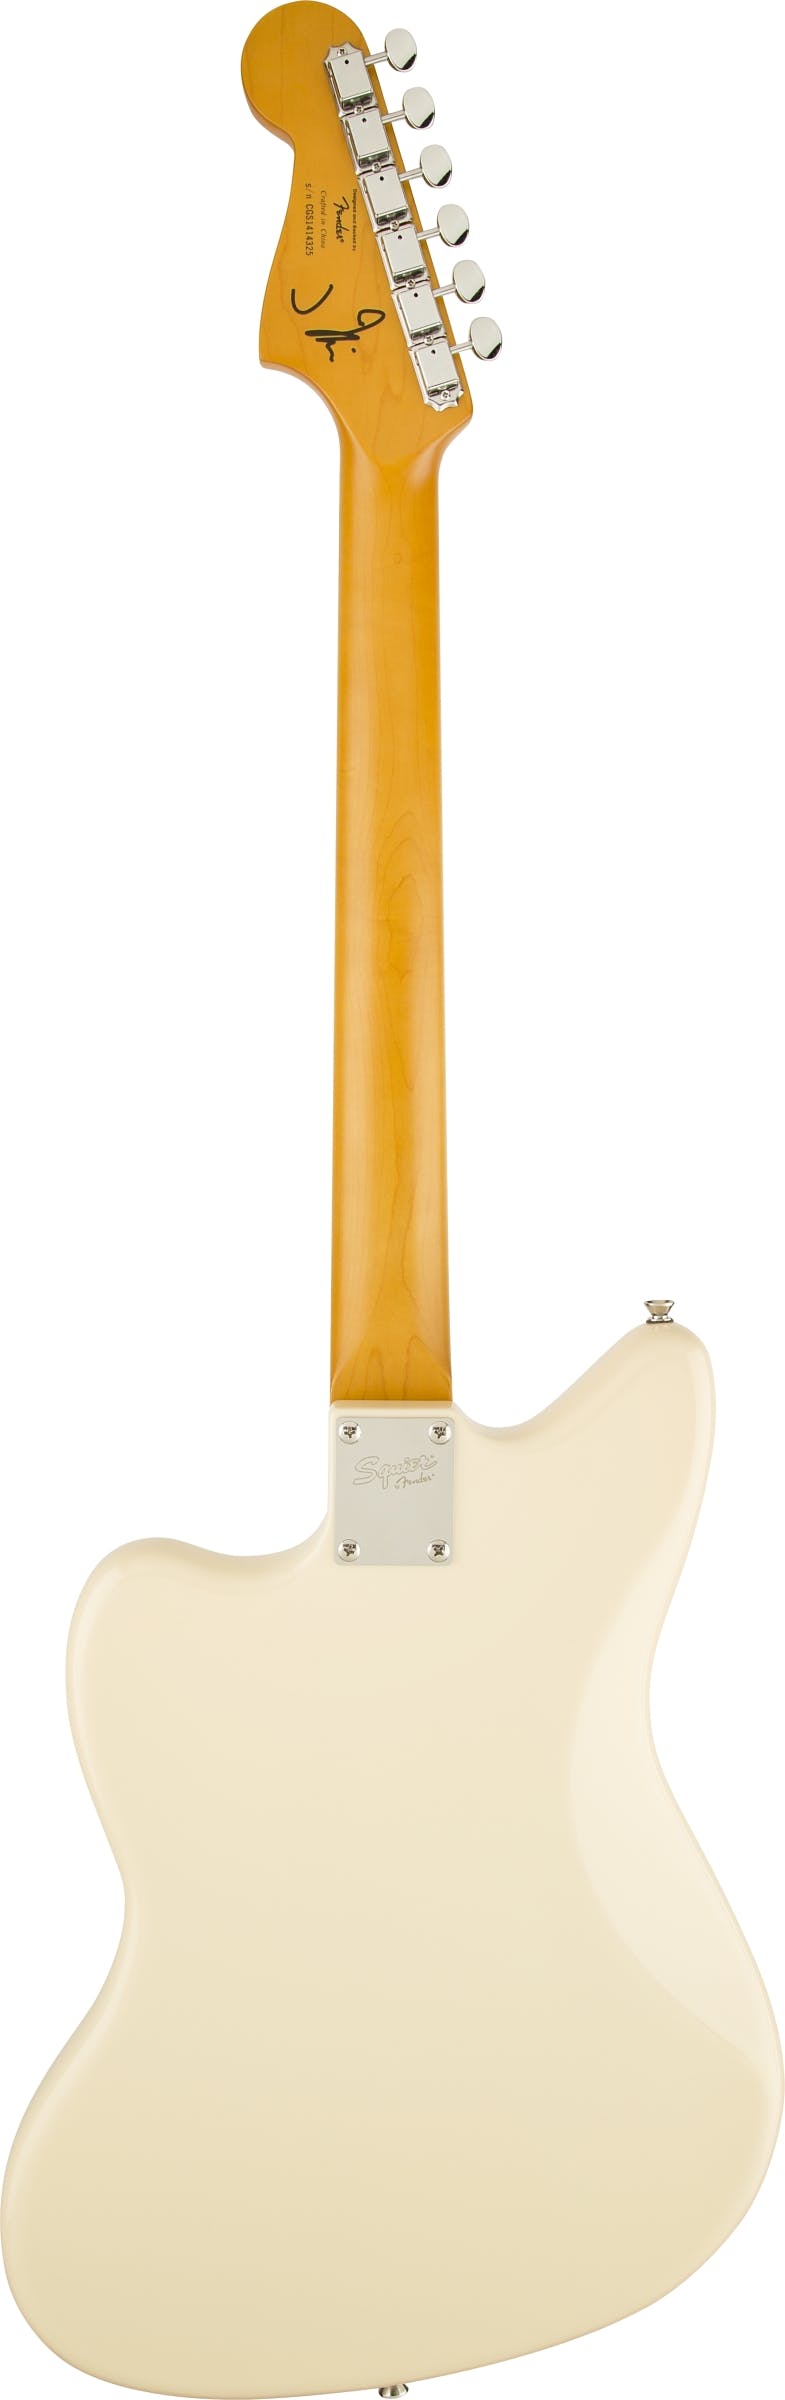 Squier J Mascis Signature Jazzmaster Electric Guitar in Vintage White with  Gold Anodized Pickguard - Andertons Music Co.